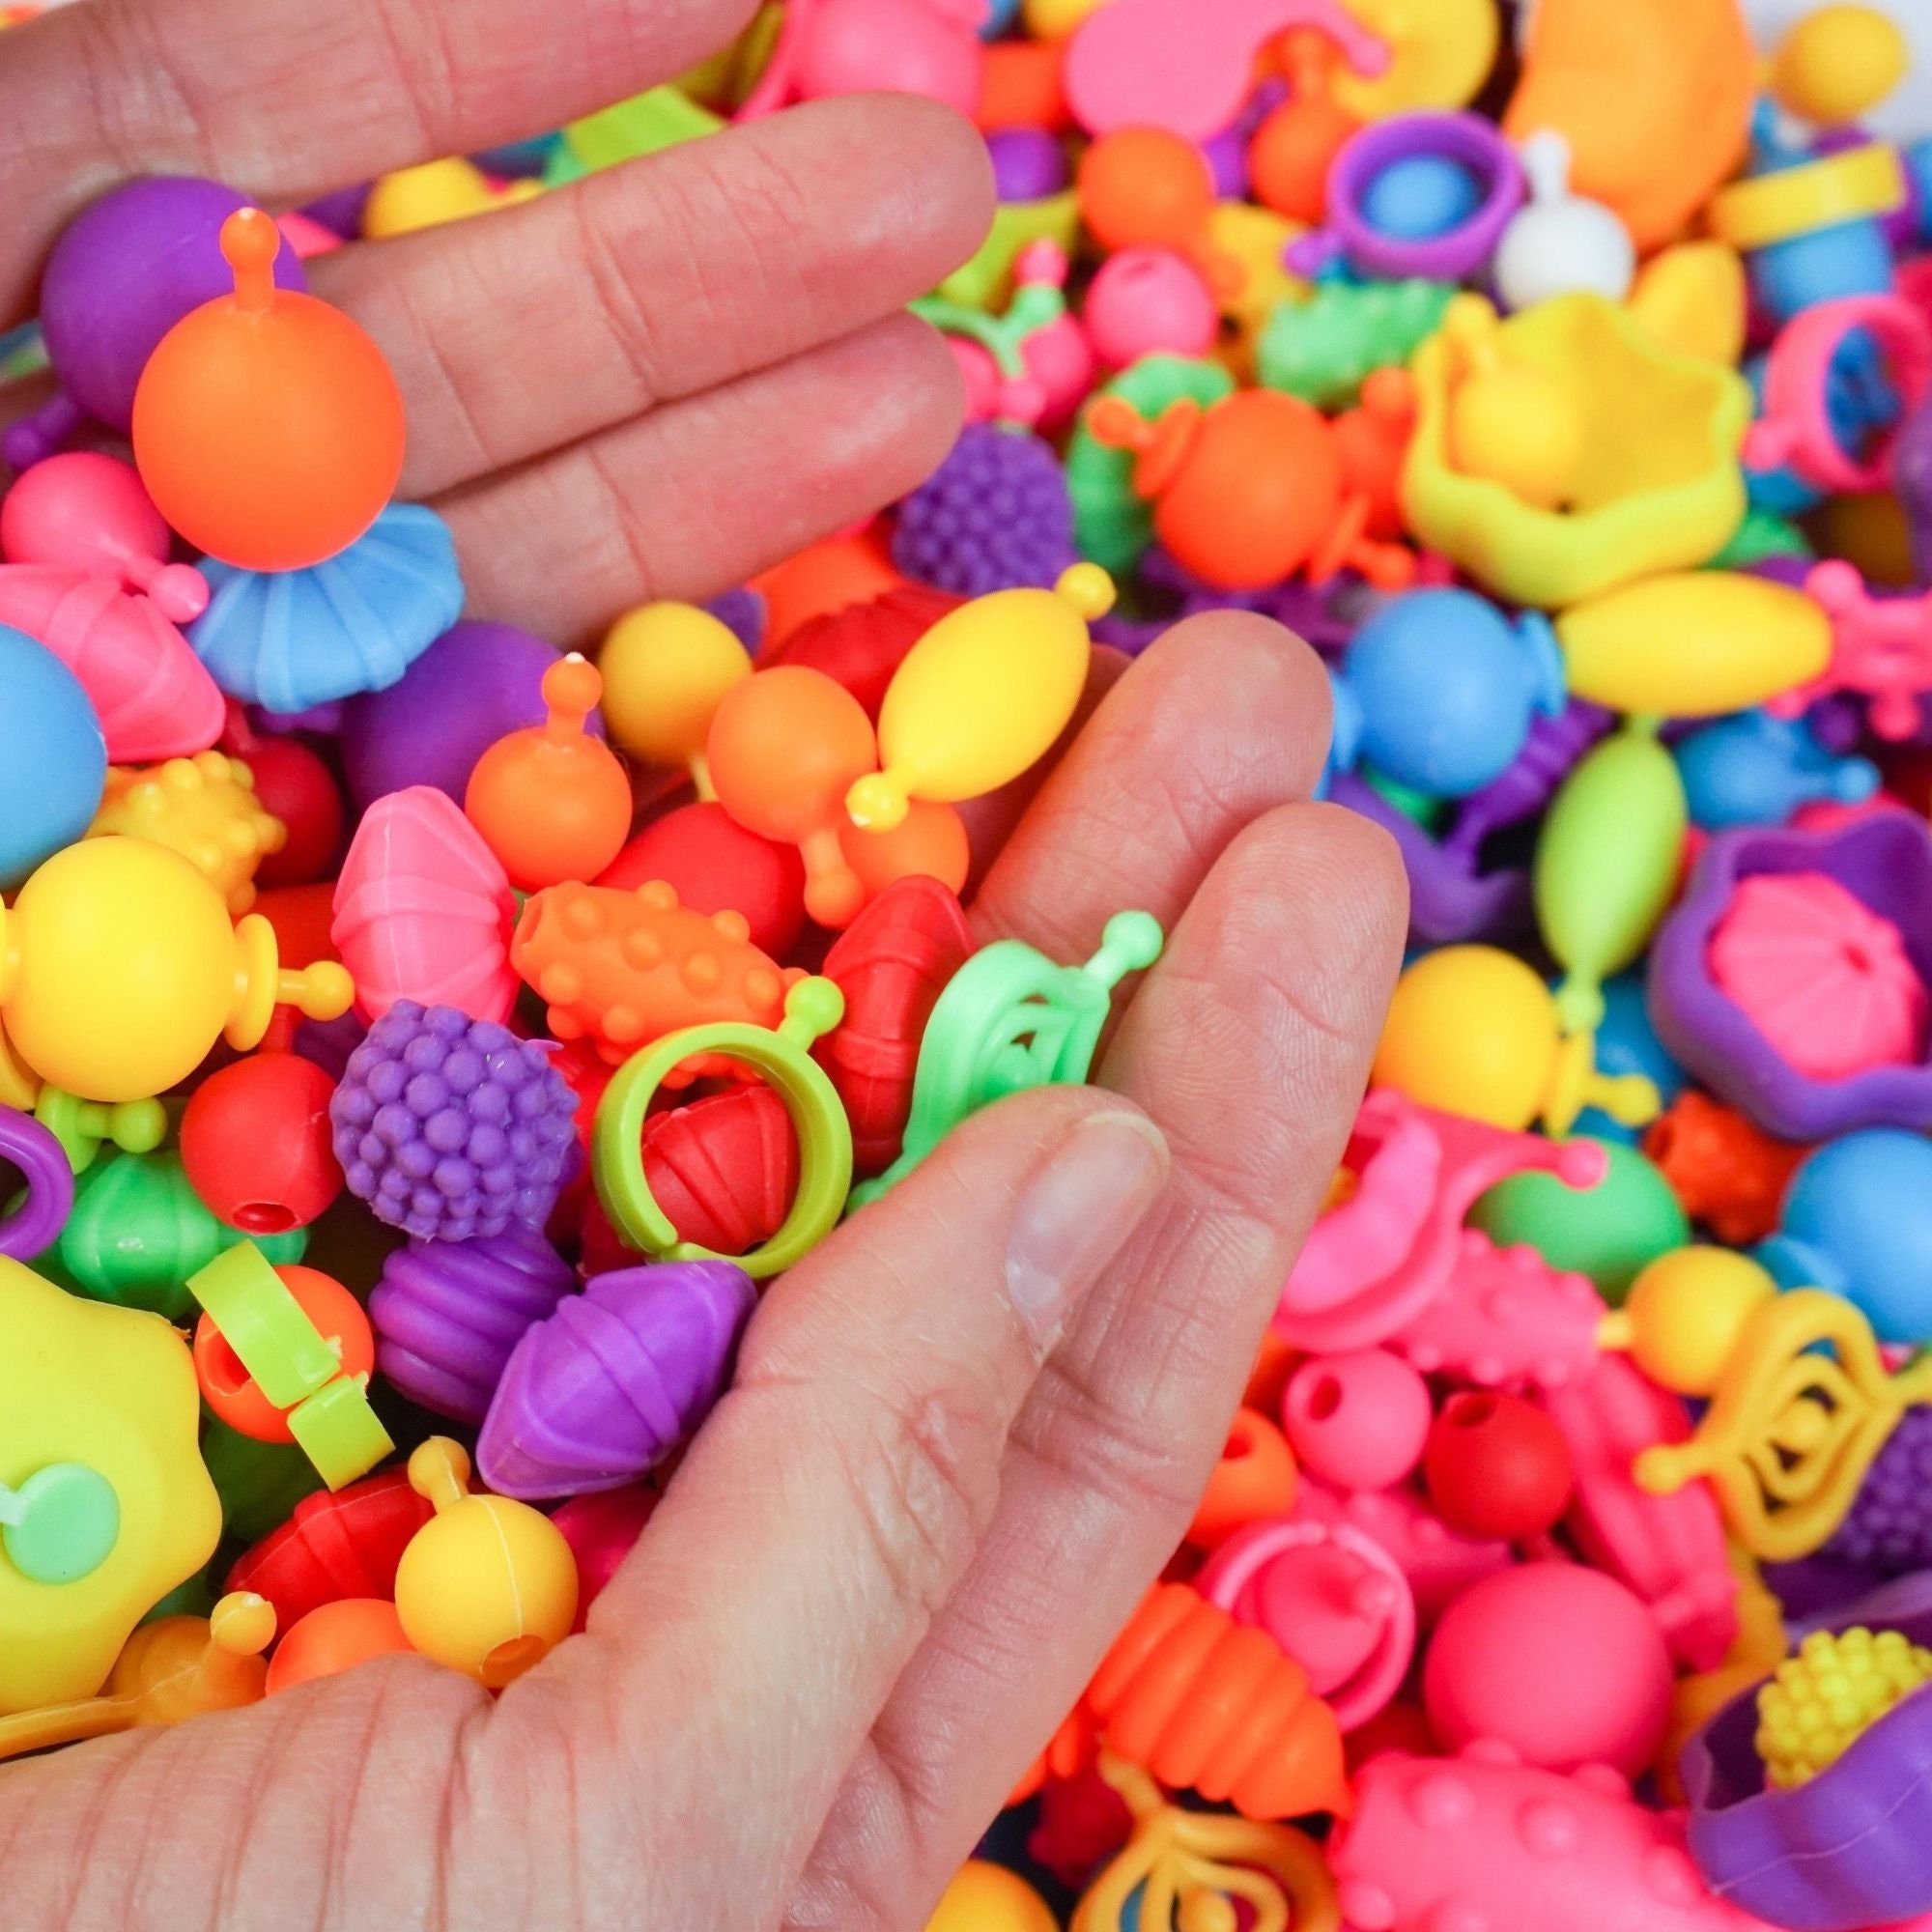 snap pop beads for girls toys